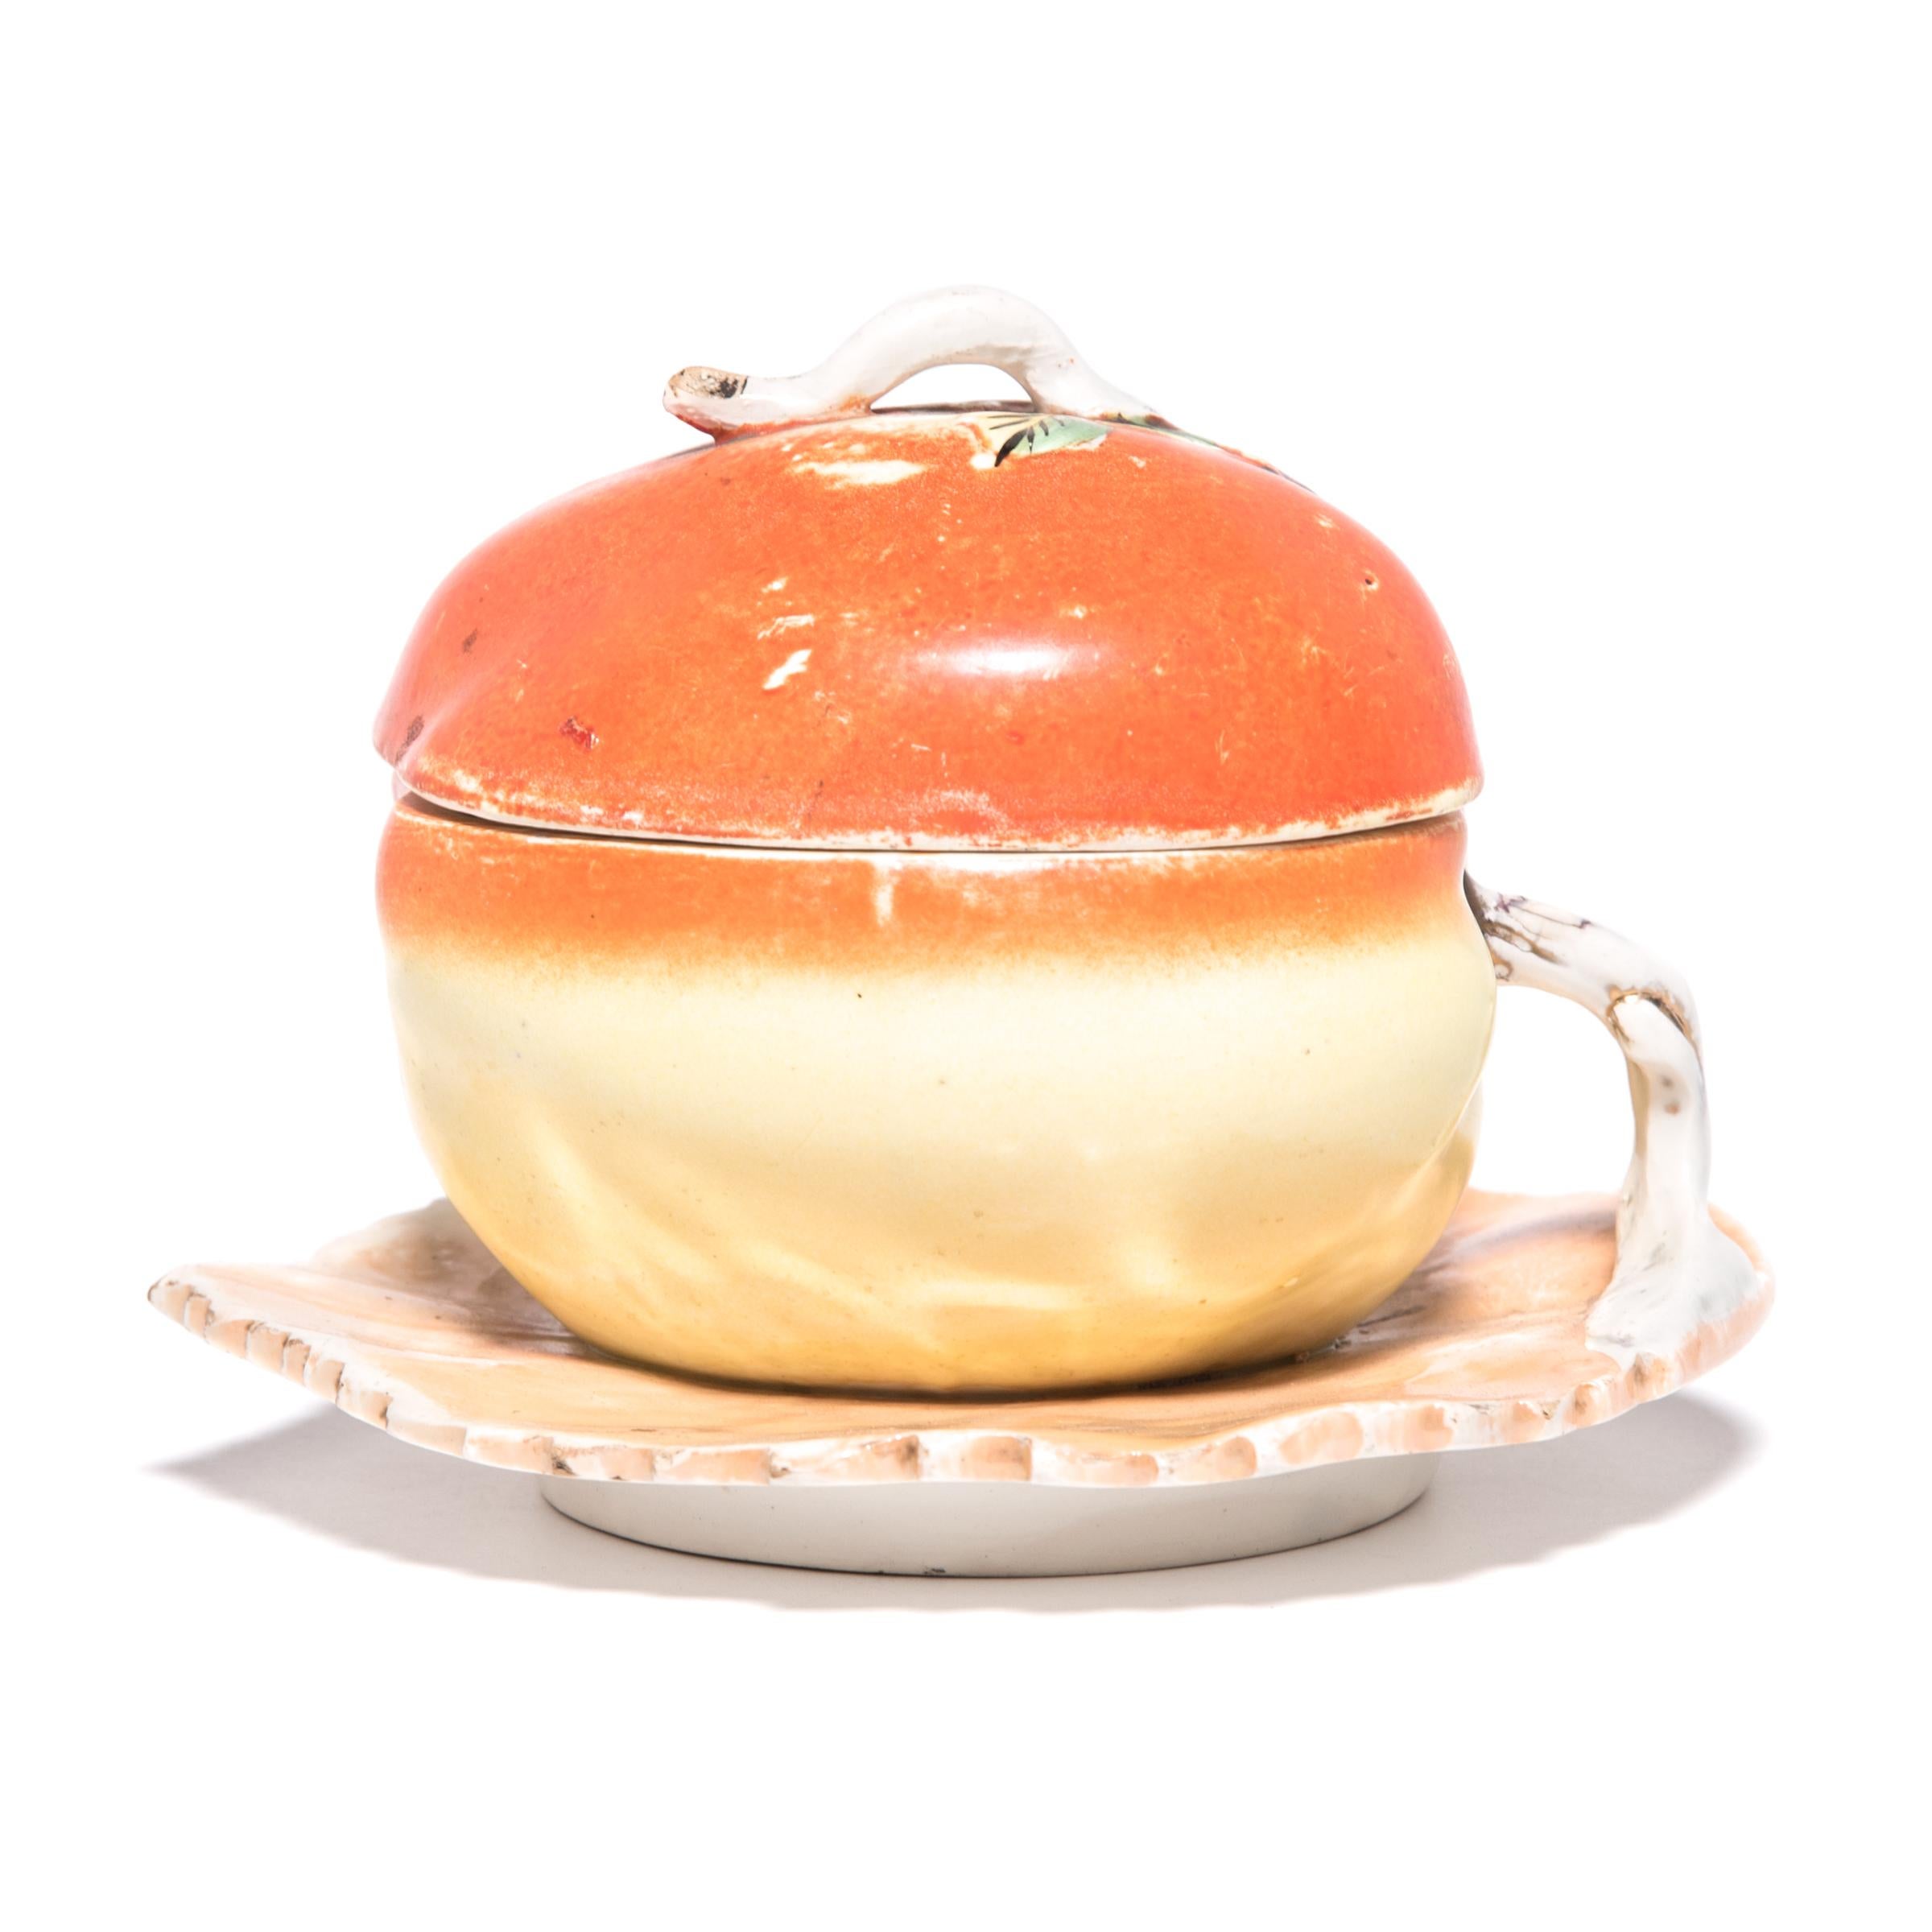 20th Century Chinese Covered Porcelain Peach Box, c. 1900